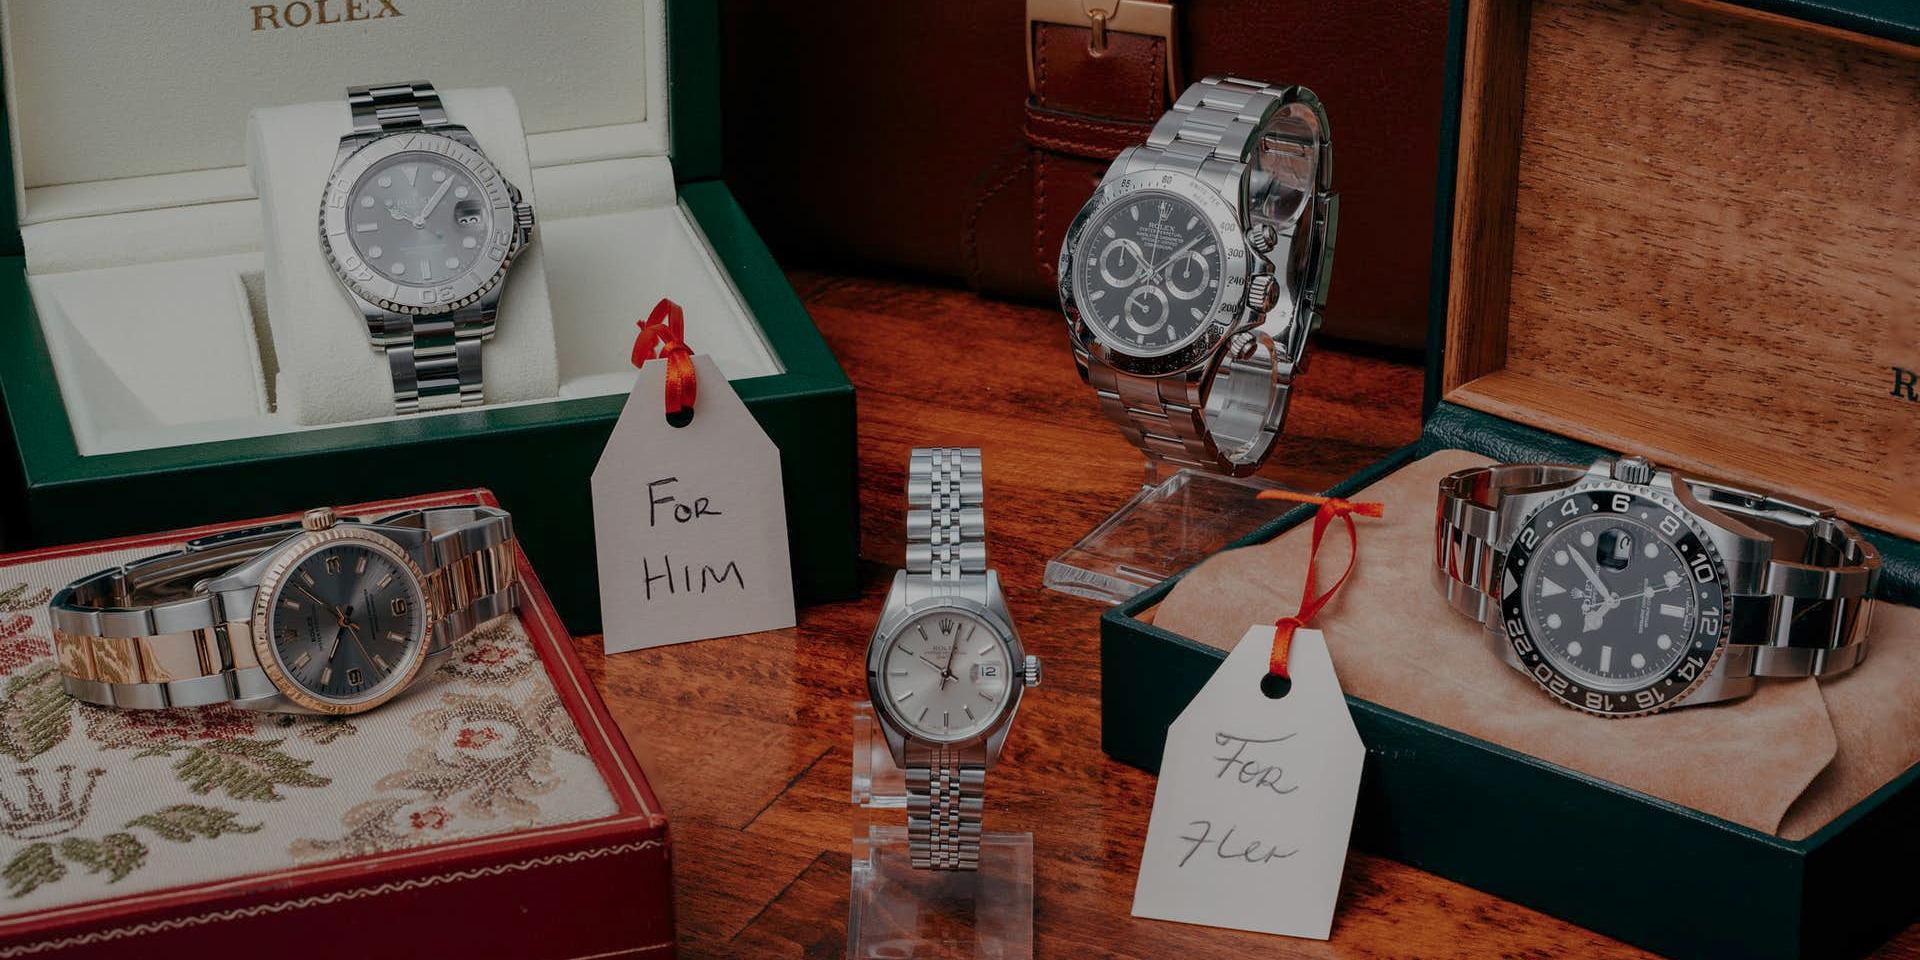 What are the top 5 Rolex gifts for Christmas?